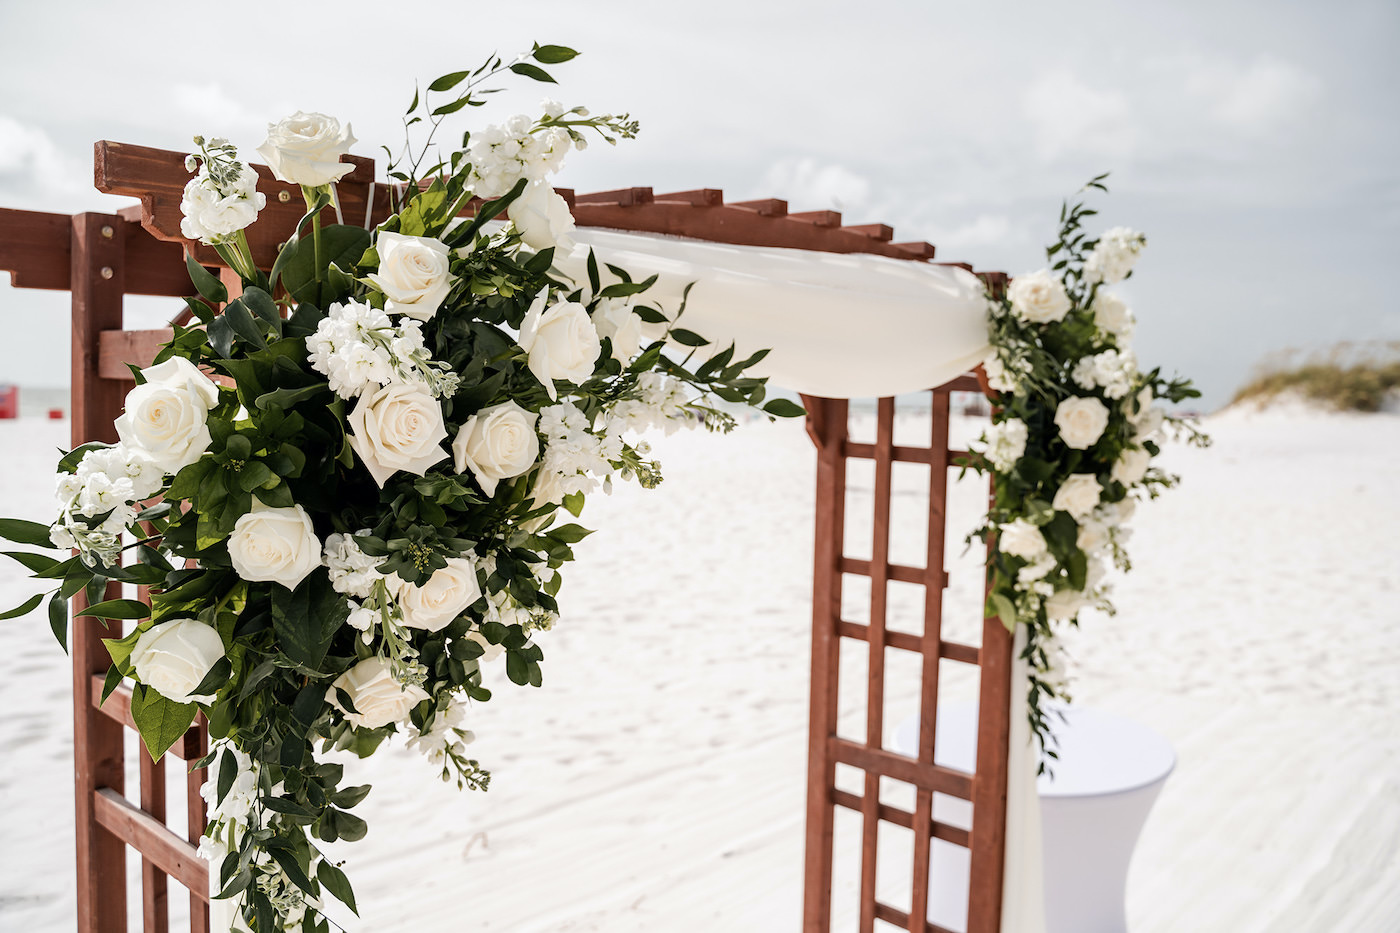 Tampa Bay Beach Wedding Ceremony, Outdoor Beachfront Ceremony on the White Powder Sand with Tropical Decor, Wooden Arch with Elegant Floral Bouquets, White Roses with Greenery and Draping | Florida Hotel and Wedding Venue Hilton Clearwater Beach